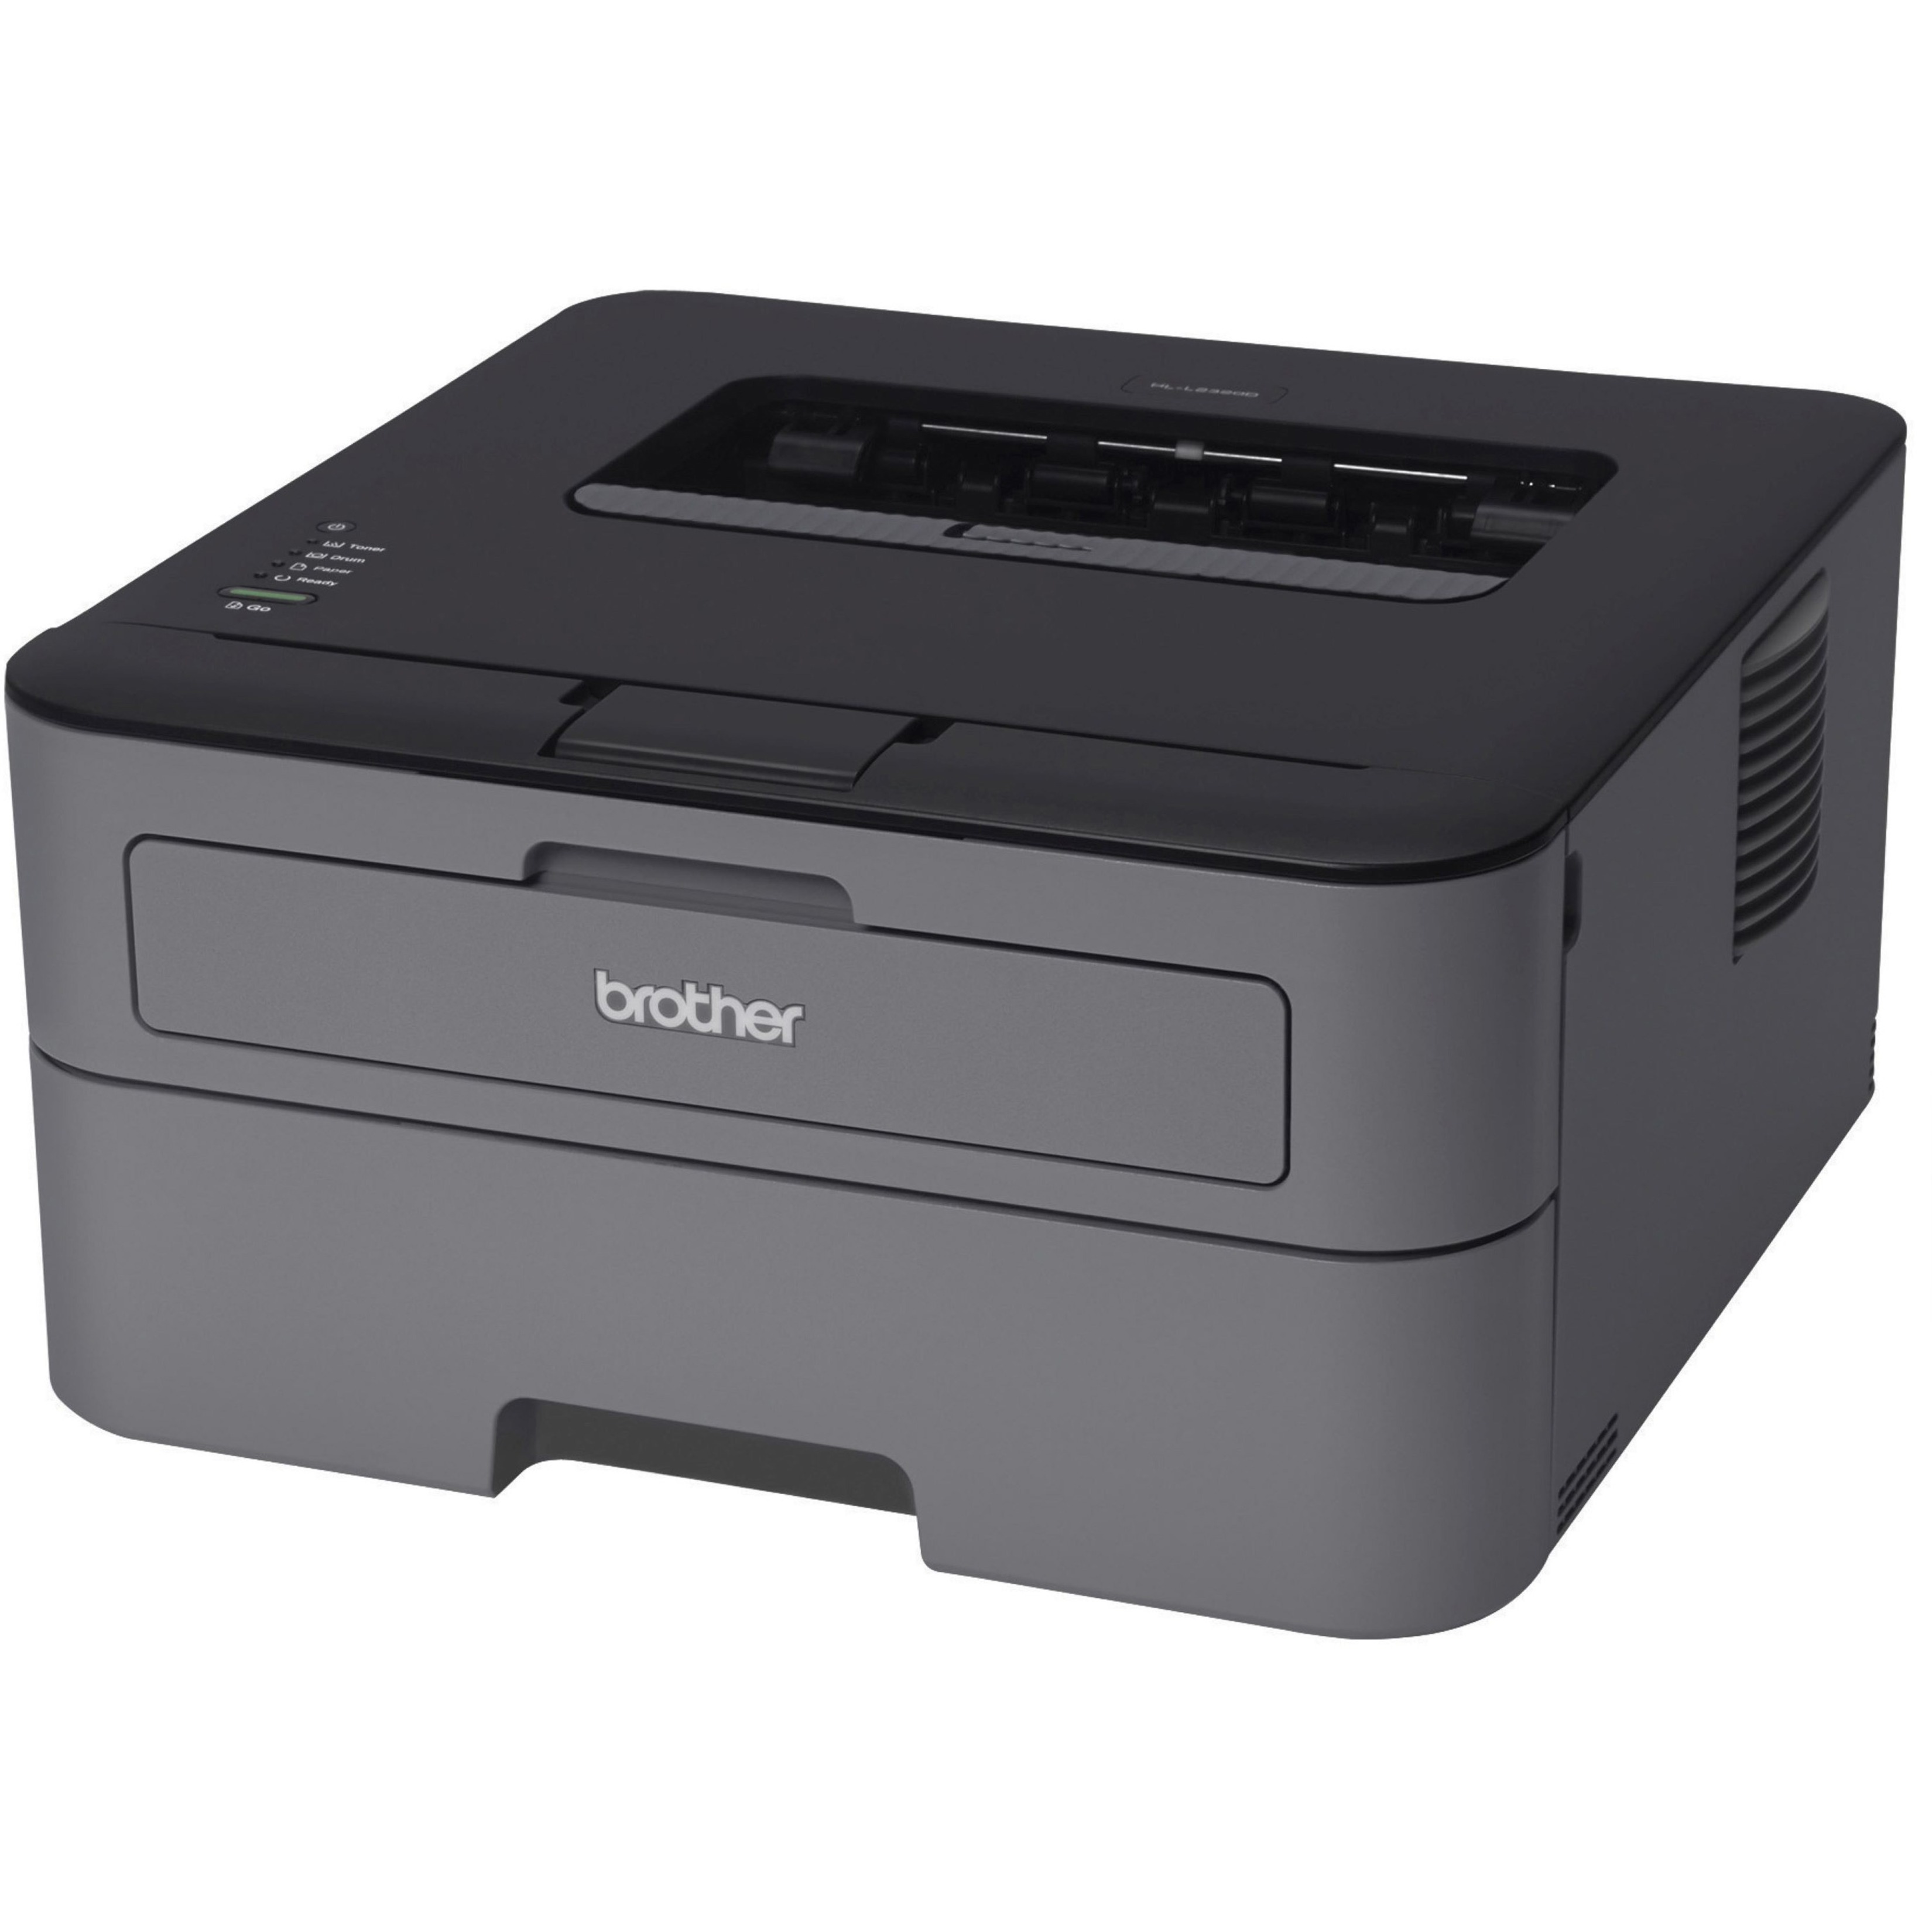 Brother HLL2300D Compact Monochrome Laser Printer, Duplex Printing - image 2 of 4